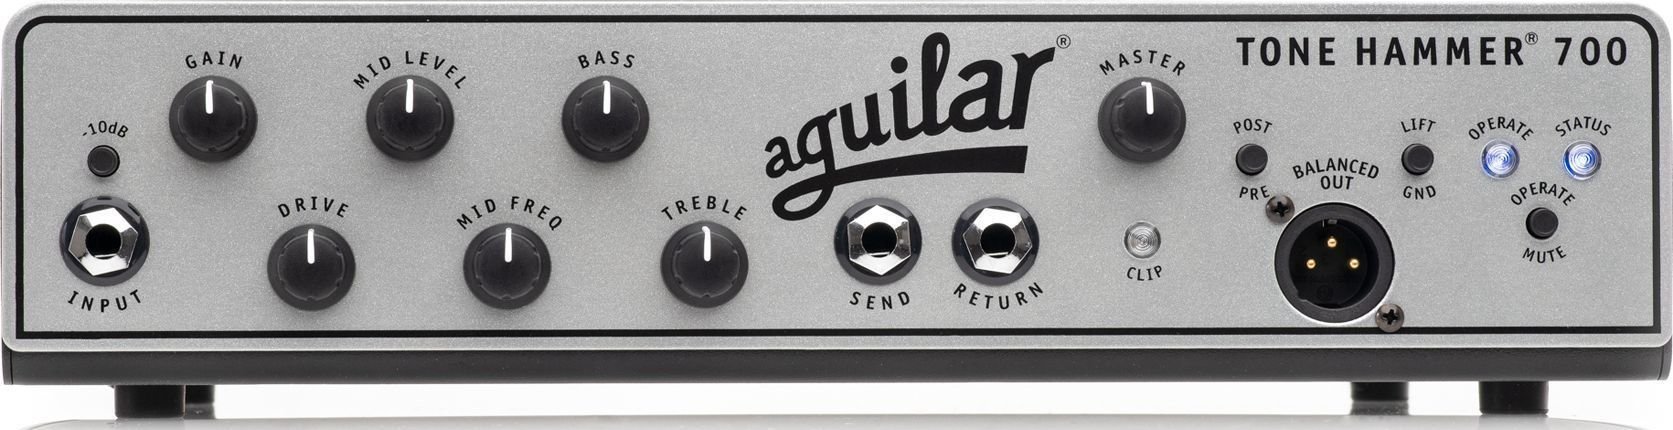 Solid-State Bass Amplifier Aguilar Tone Hammer 700